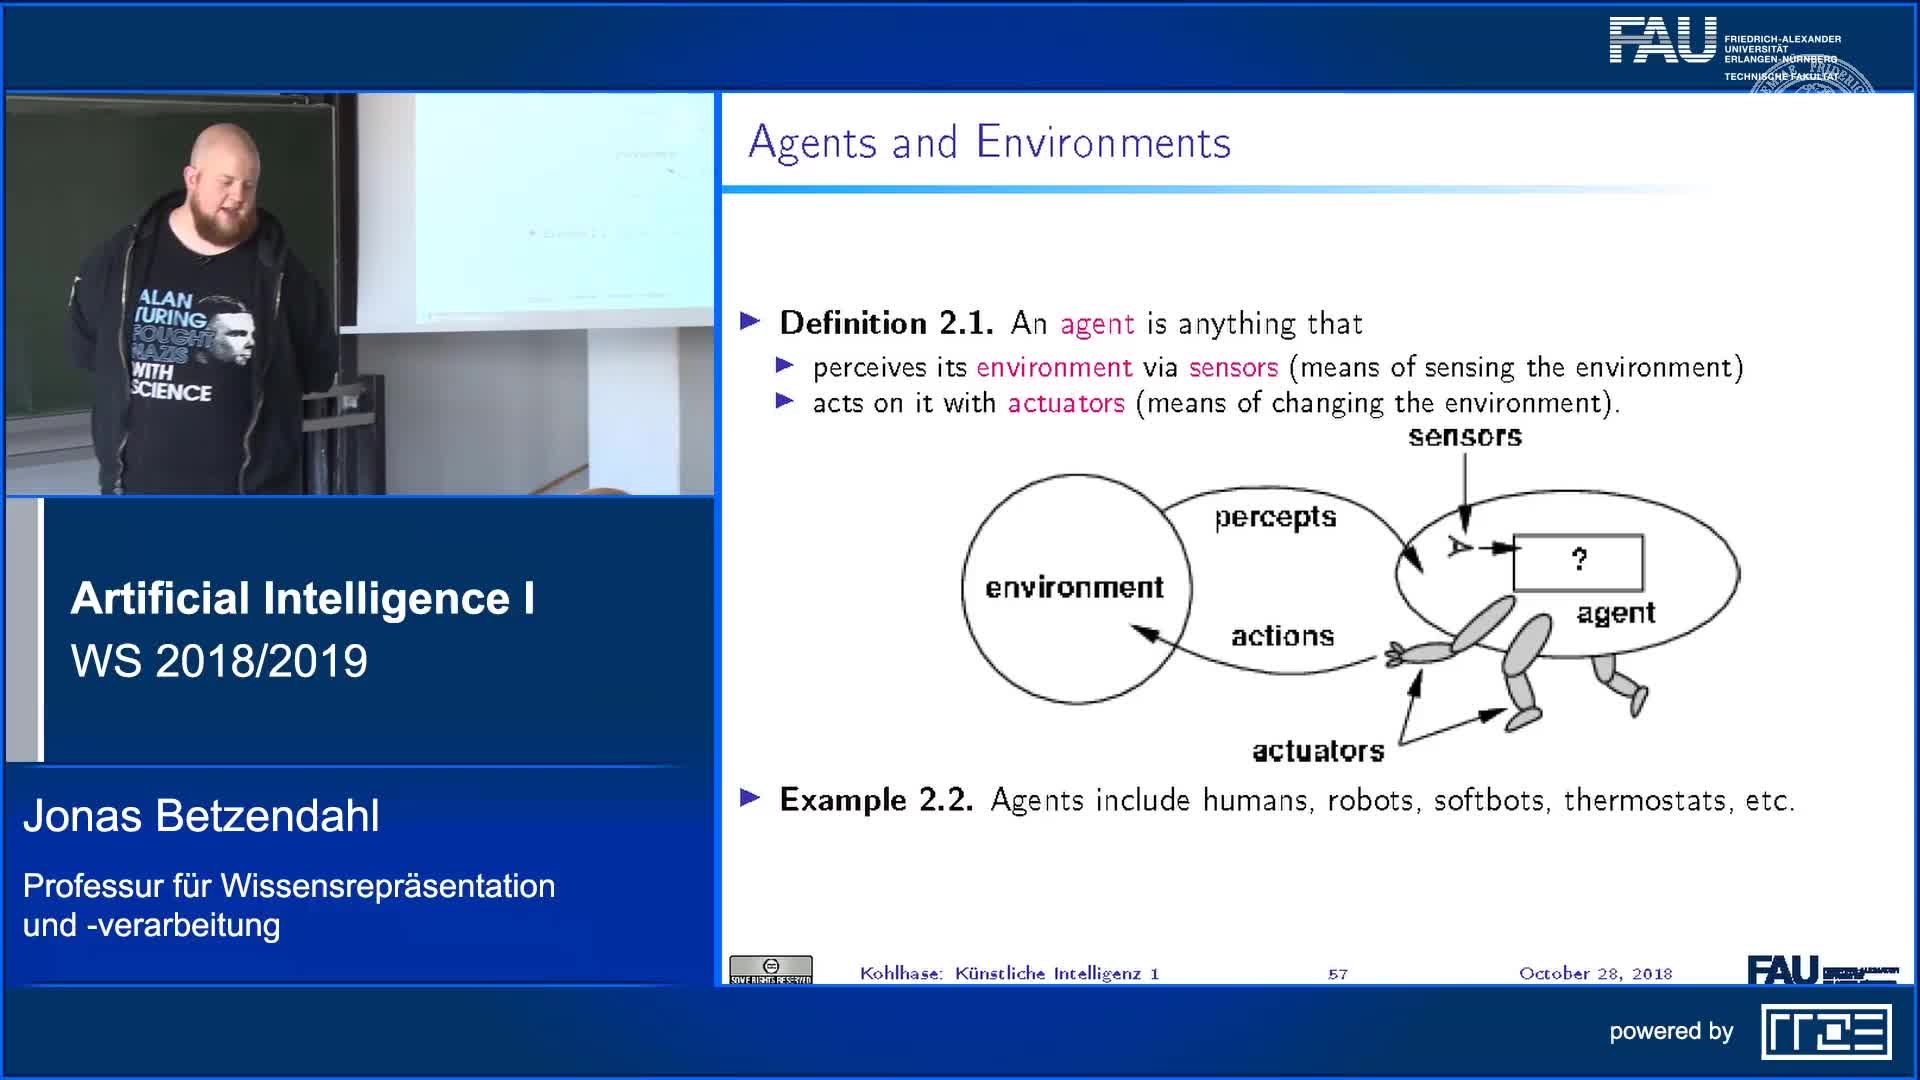 Agents and Environments as a Framework for AI preview image